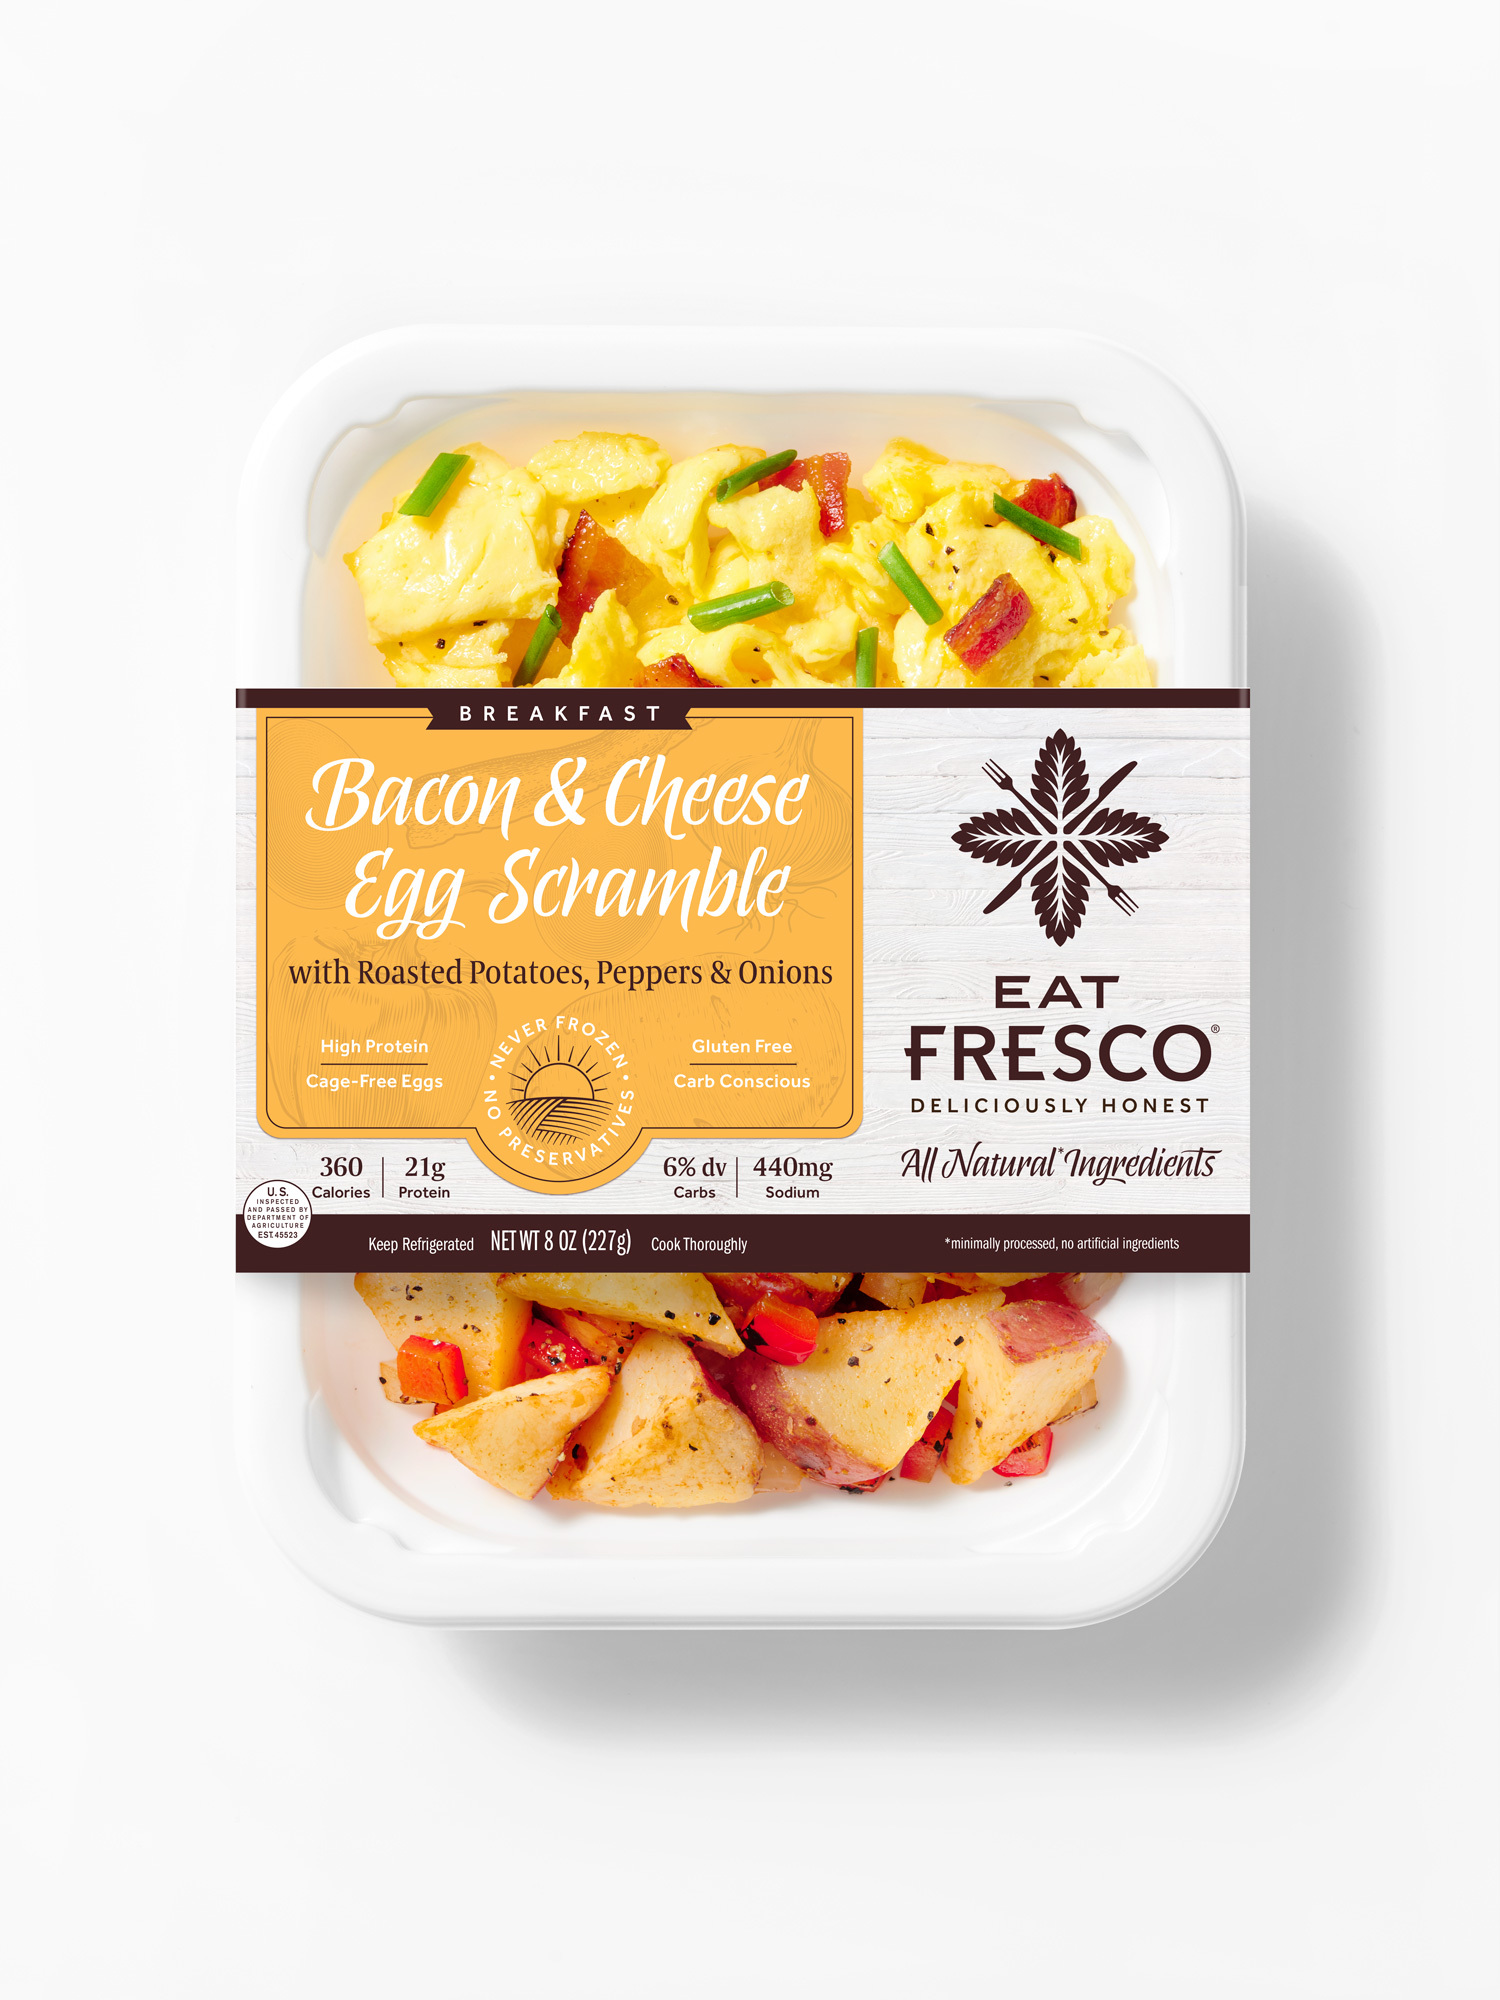 Courtesy. One of Fresco Foods' new breakfast items that will be available later in the year.